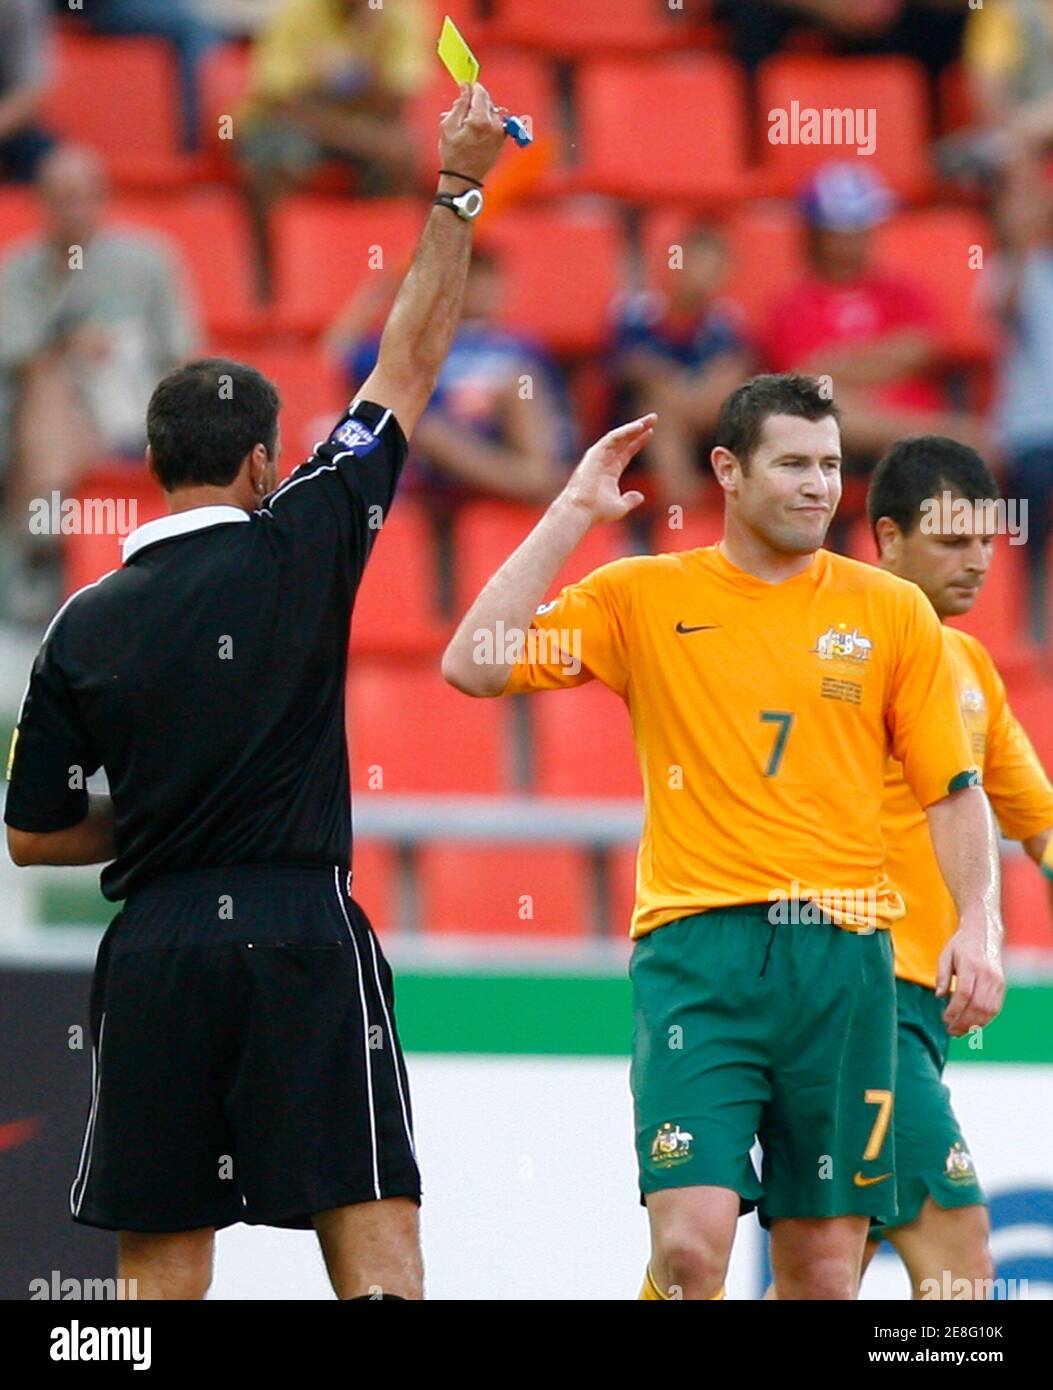 Australia's Brett Emerton reacts after receiving a yellow card from referee Eddy Maillet during Australia's Group A soccer match against Oman at the AFC Asian Cup at Rajamangala Stadium in Bangkok July 8, 2007. Walking past Emerton is team mate Mile Sterjovski.   REUTERS/Jerry Lampen   (THAILAND) Stock Photo